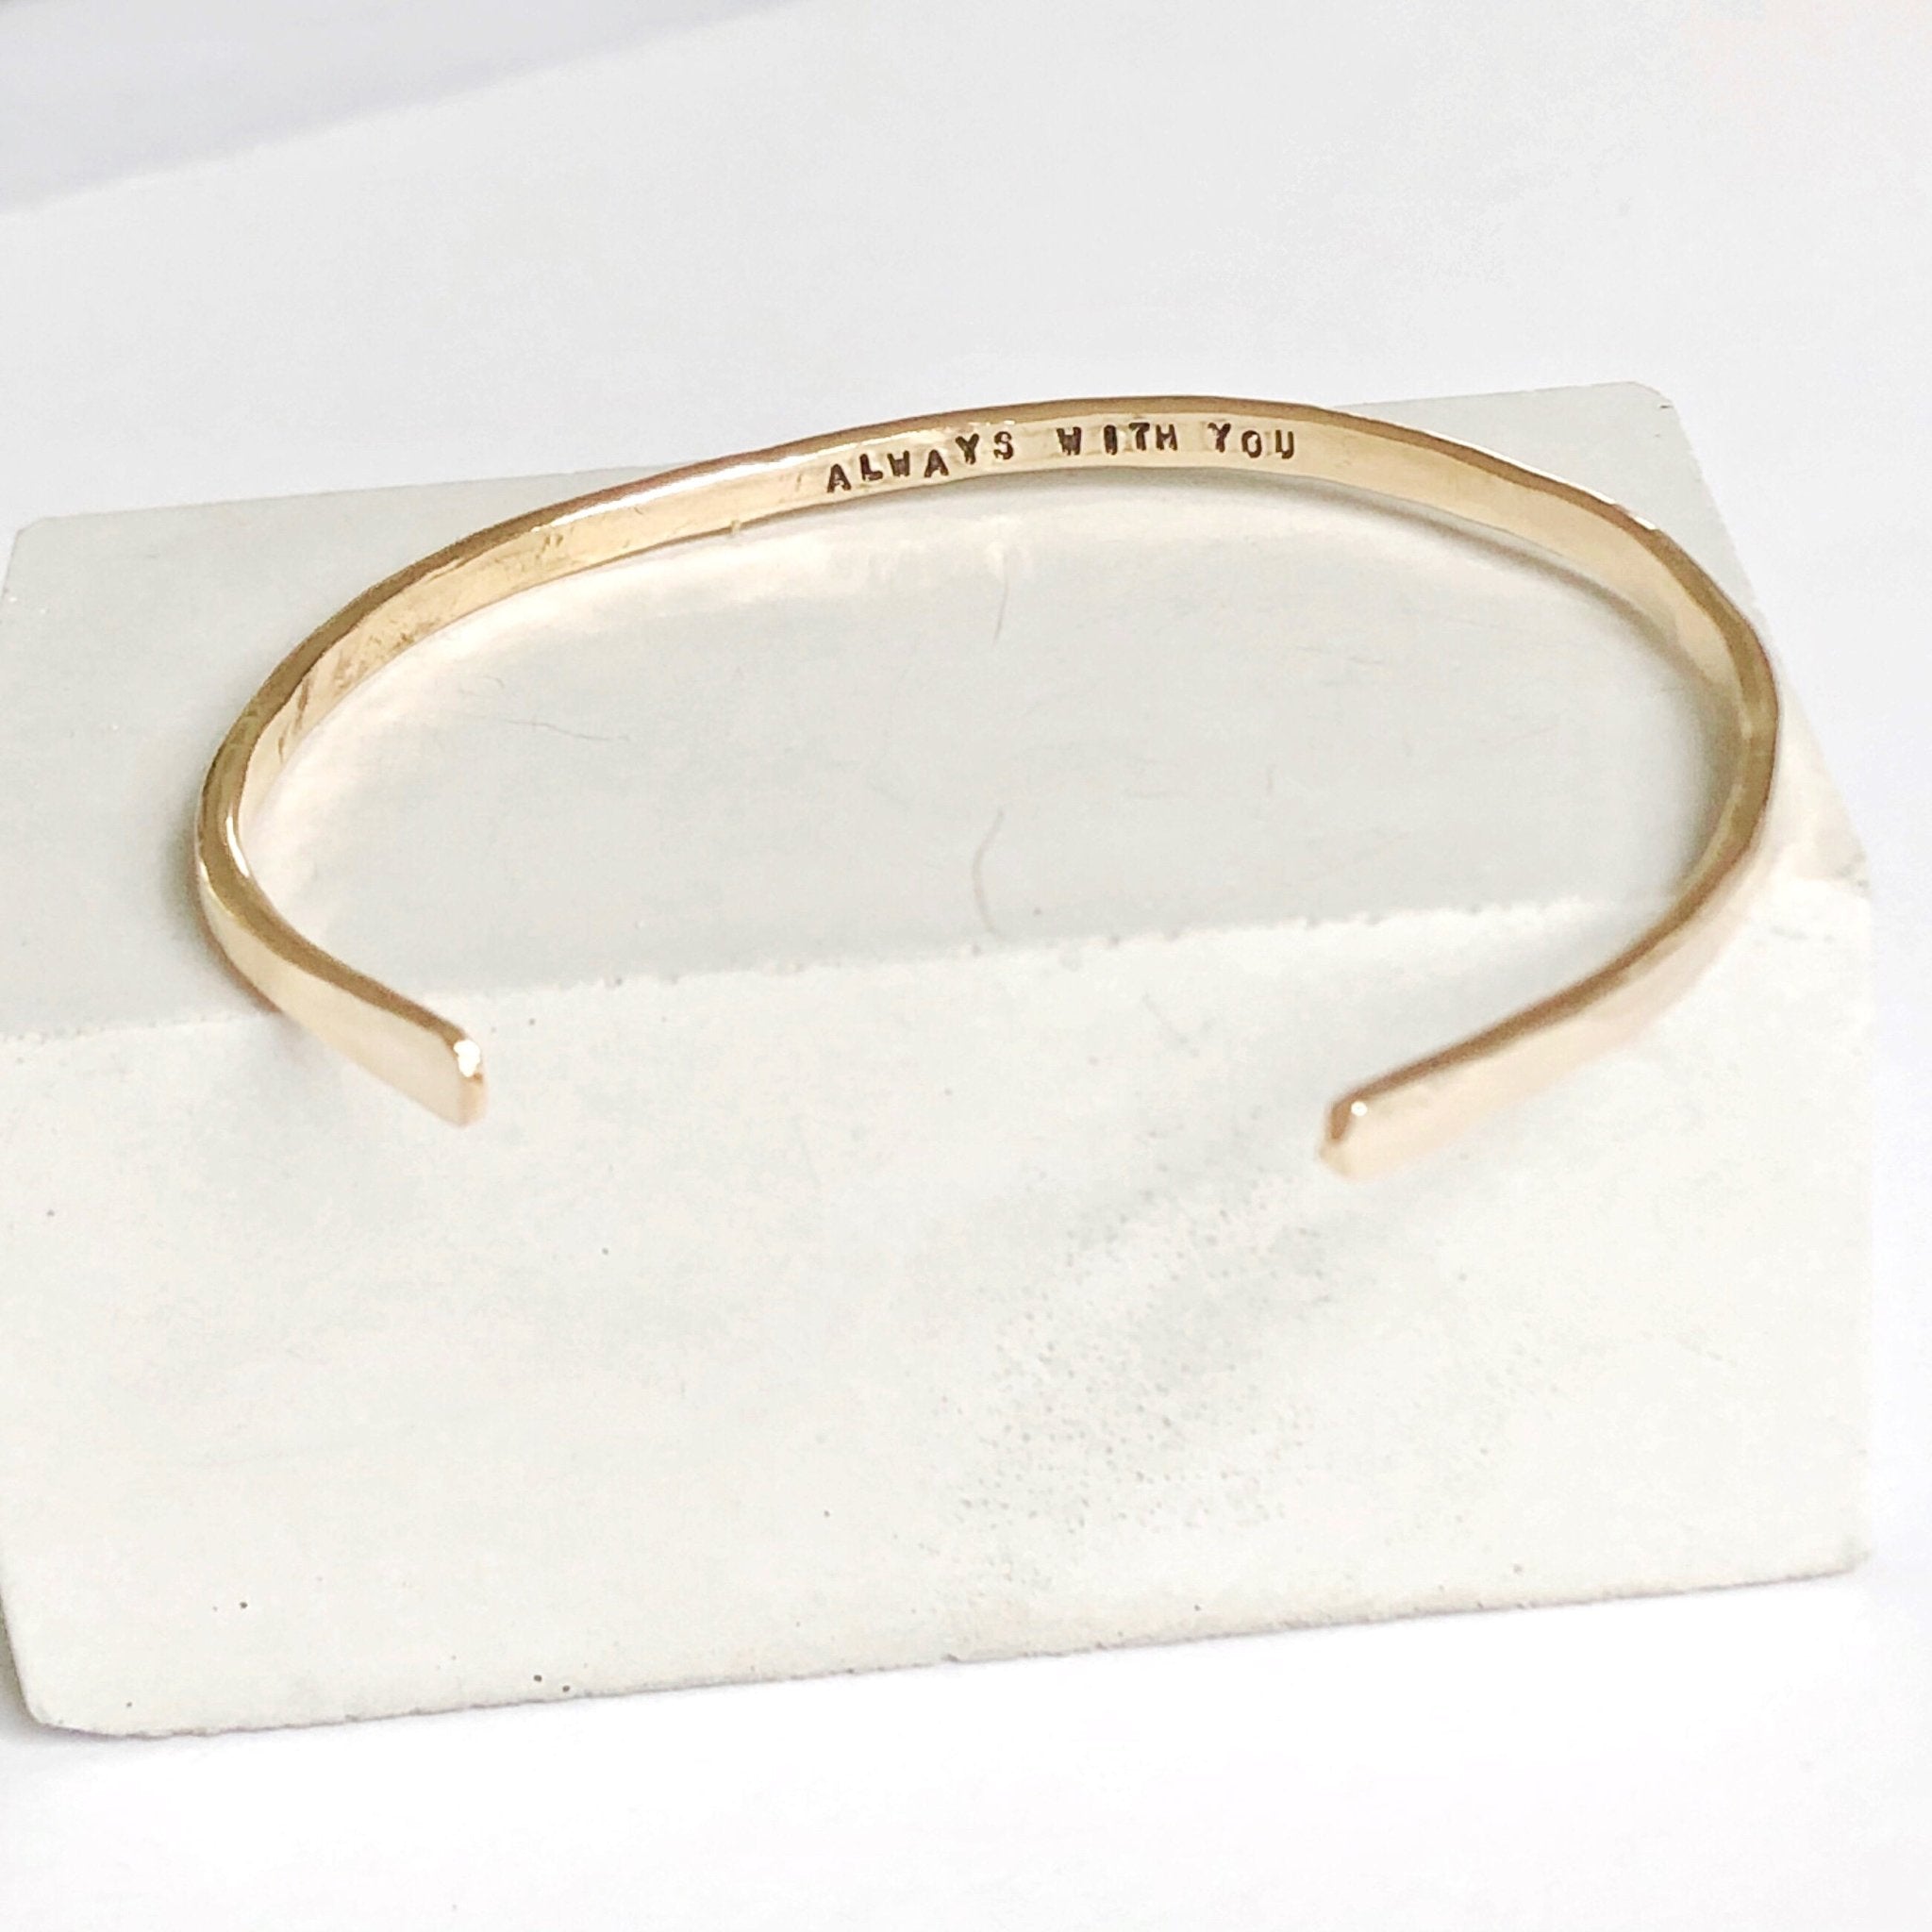 Gold textured bangle bracelet with the words "always with you" stamped on the inside. Always with You Bangle by Sarah Cornwell Jewelry